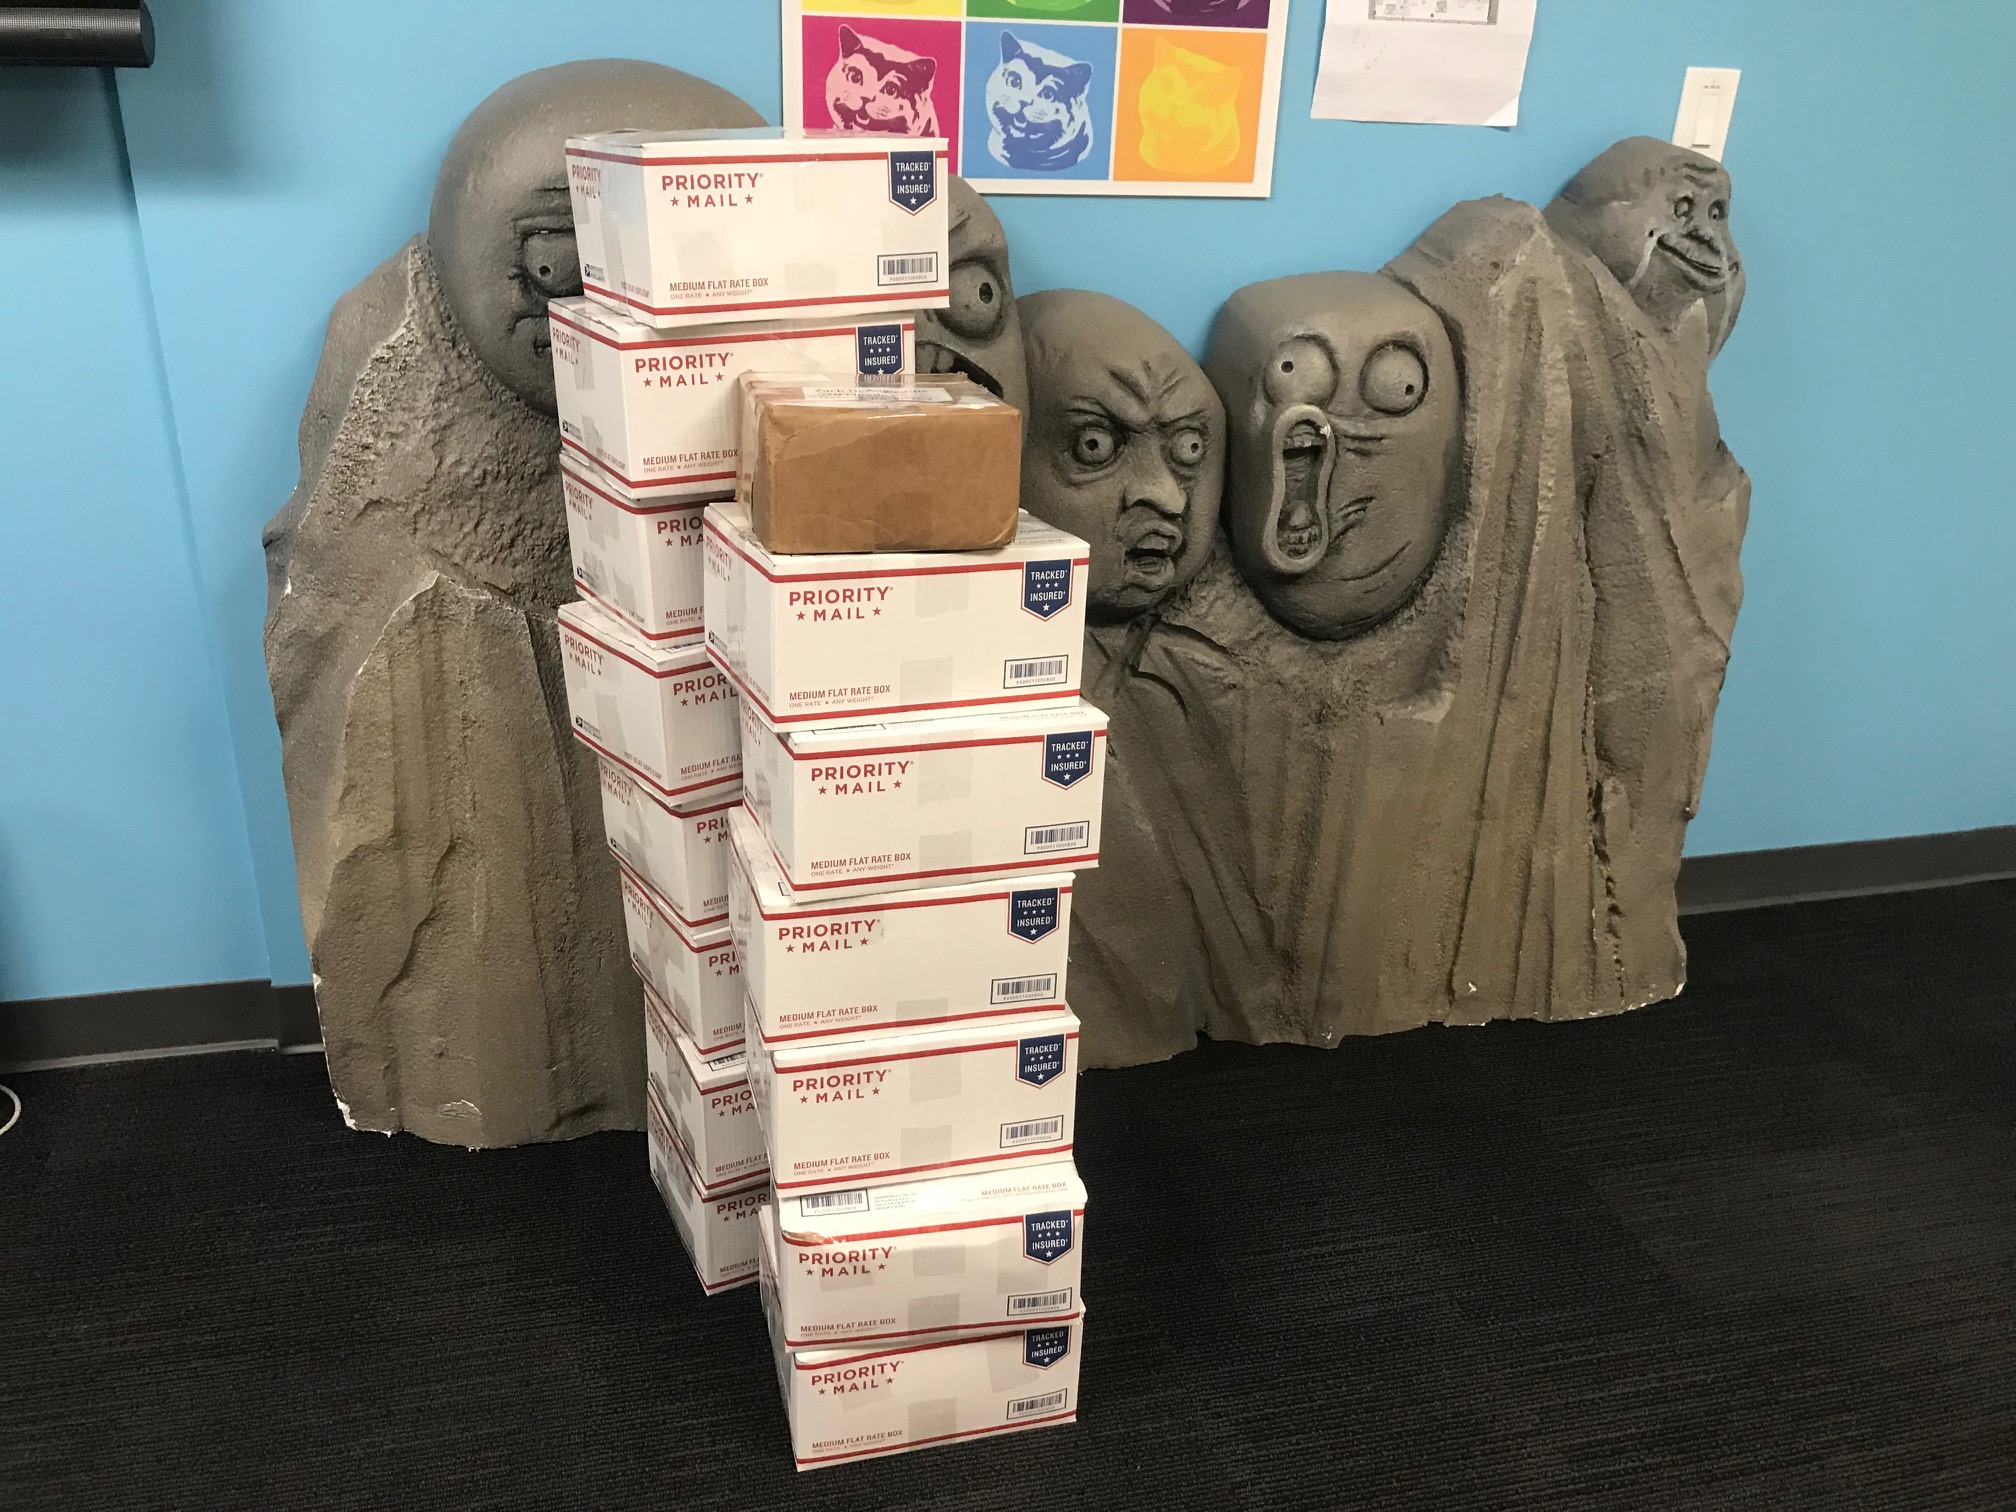 Hey guys, just an update that most of the remaining swag packs are about to go to the Post Office. There are still some people who I need some info from, but otherwise, we're 95% caught up. 